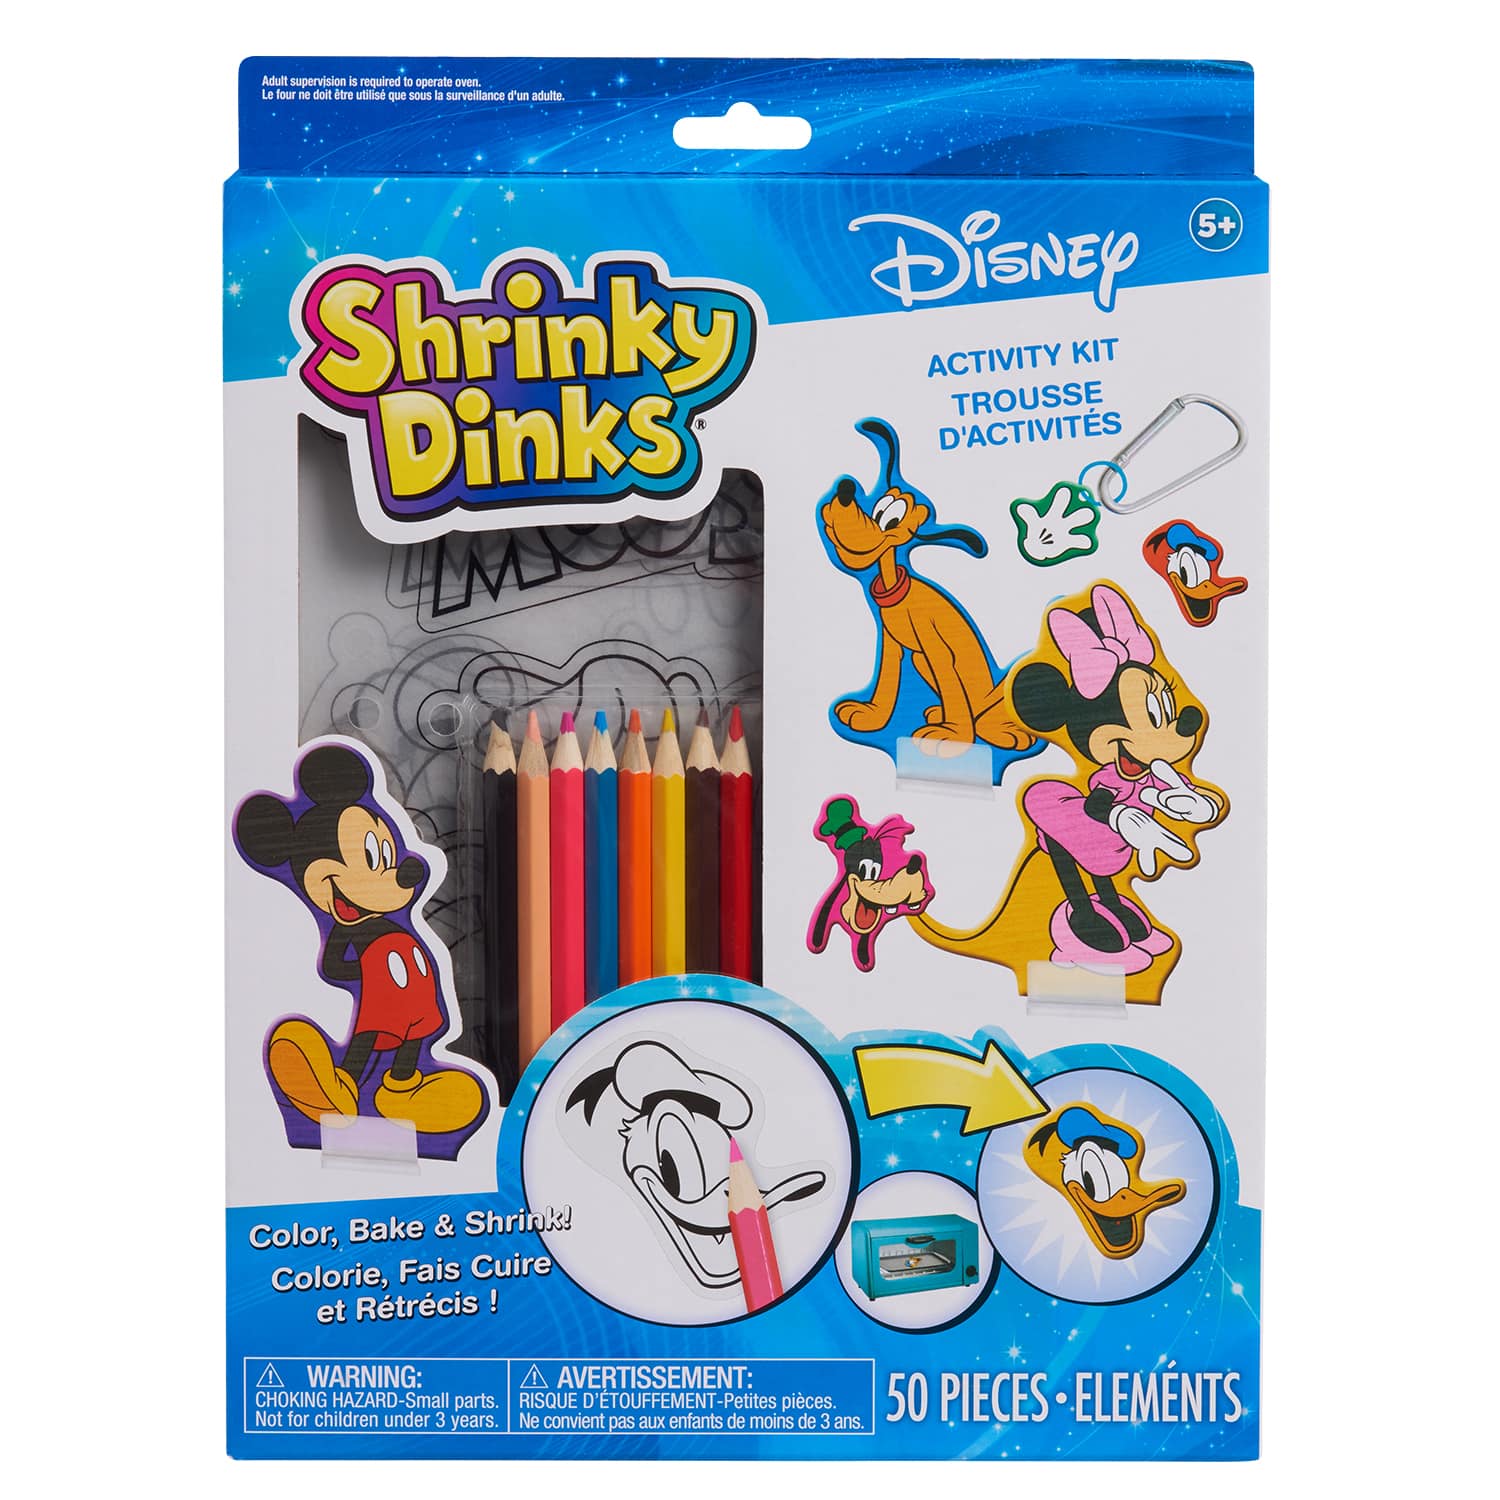 Shrinky Dinks Christmas Tree Kit, Kids Toys for Ages 5 Up by Just Play